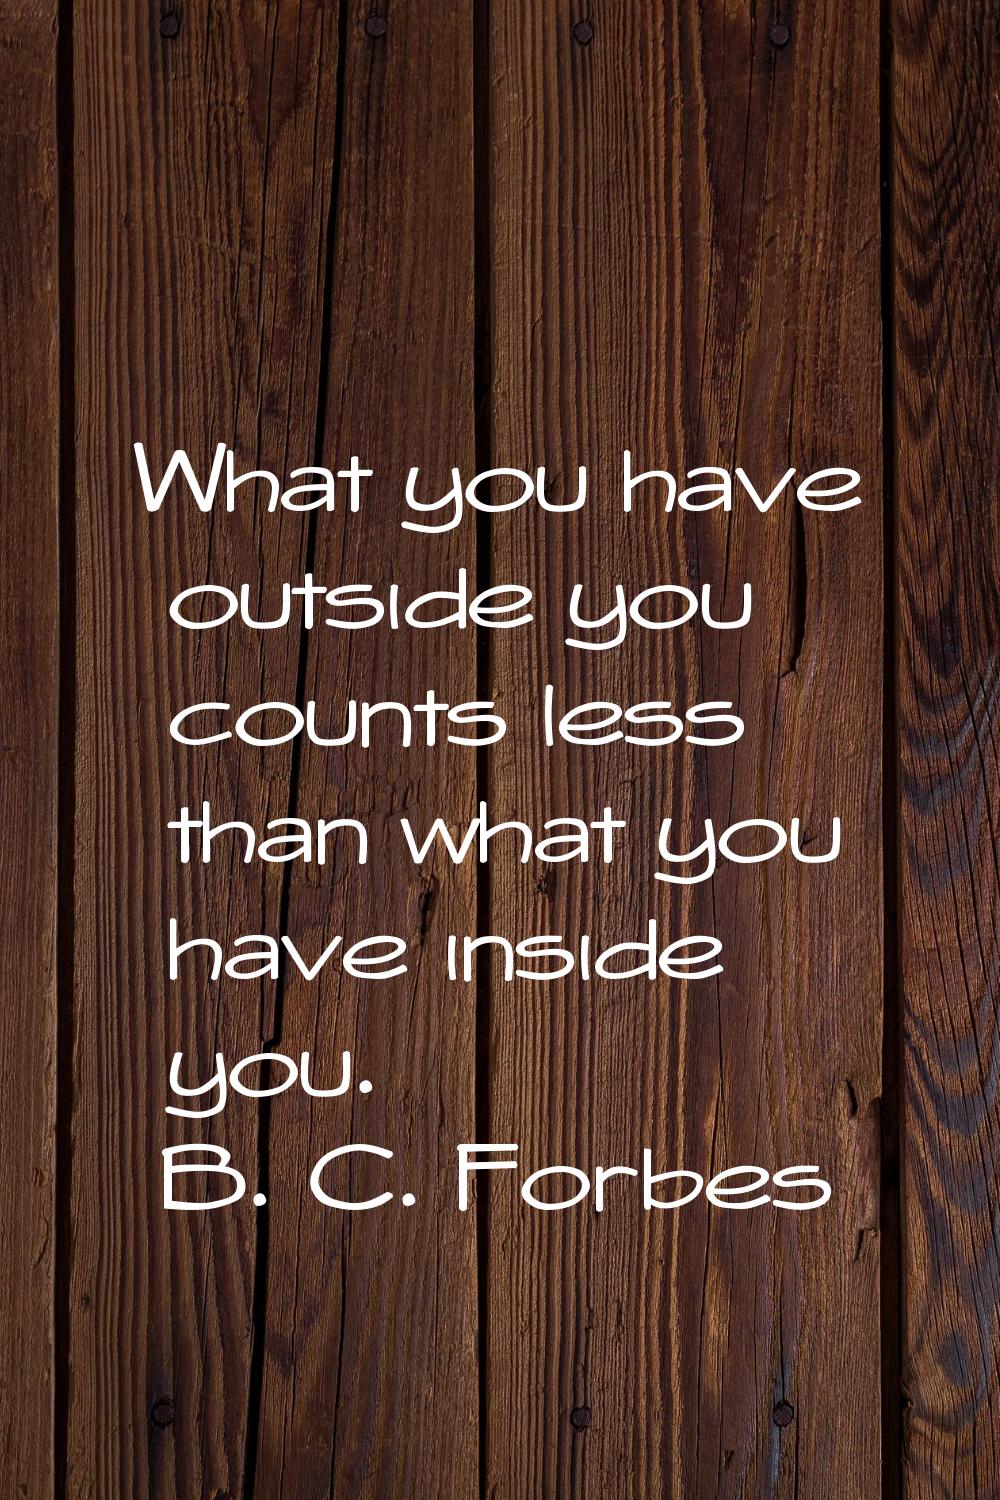 What you have outside you counts less than what you have inside you.